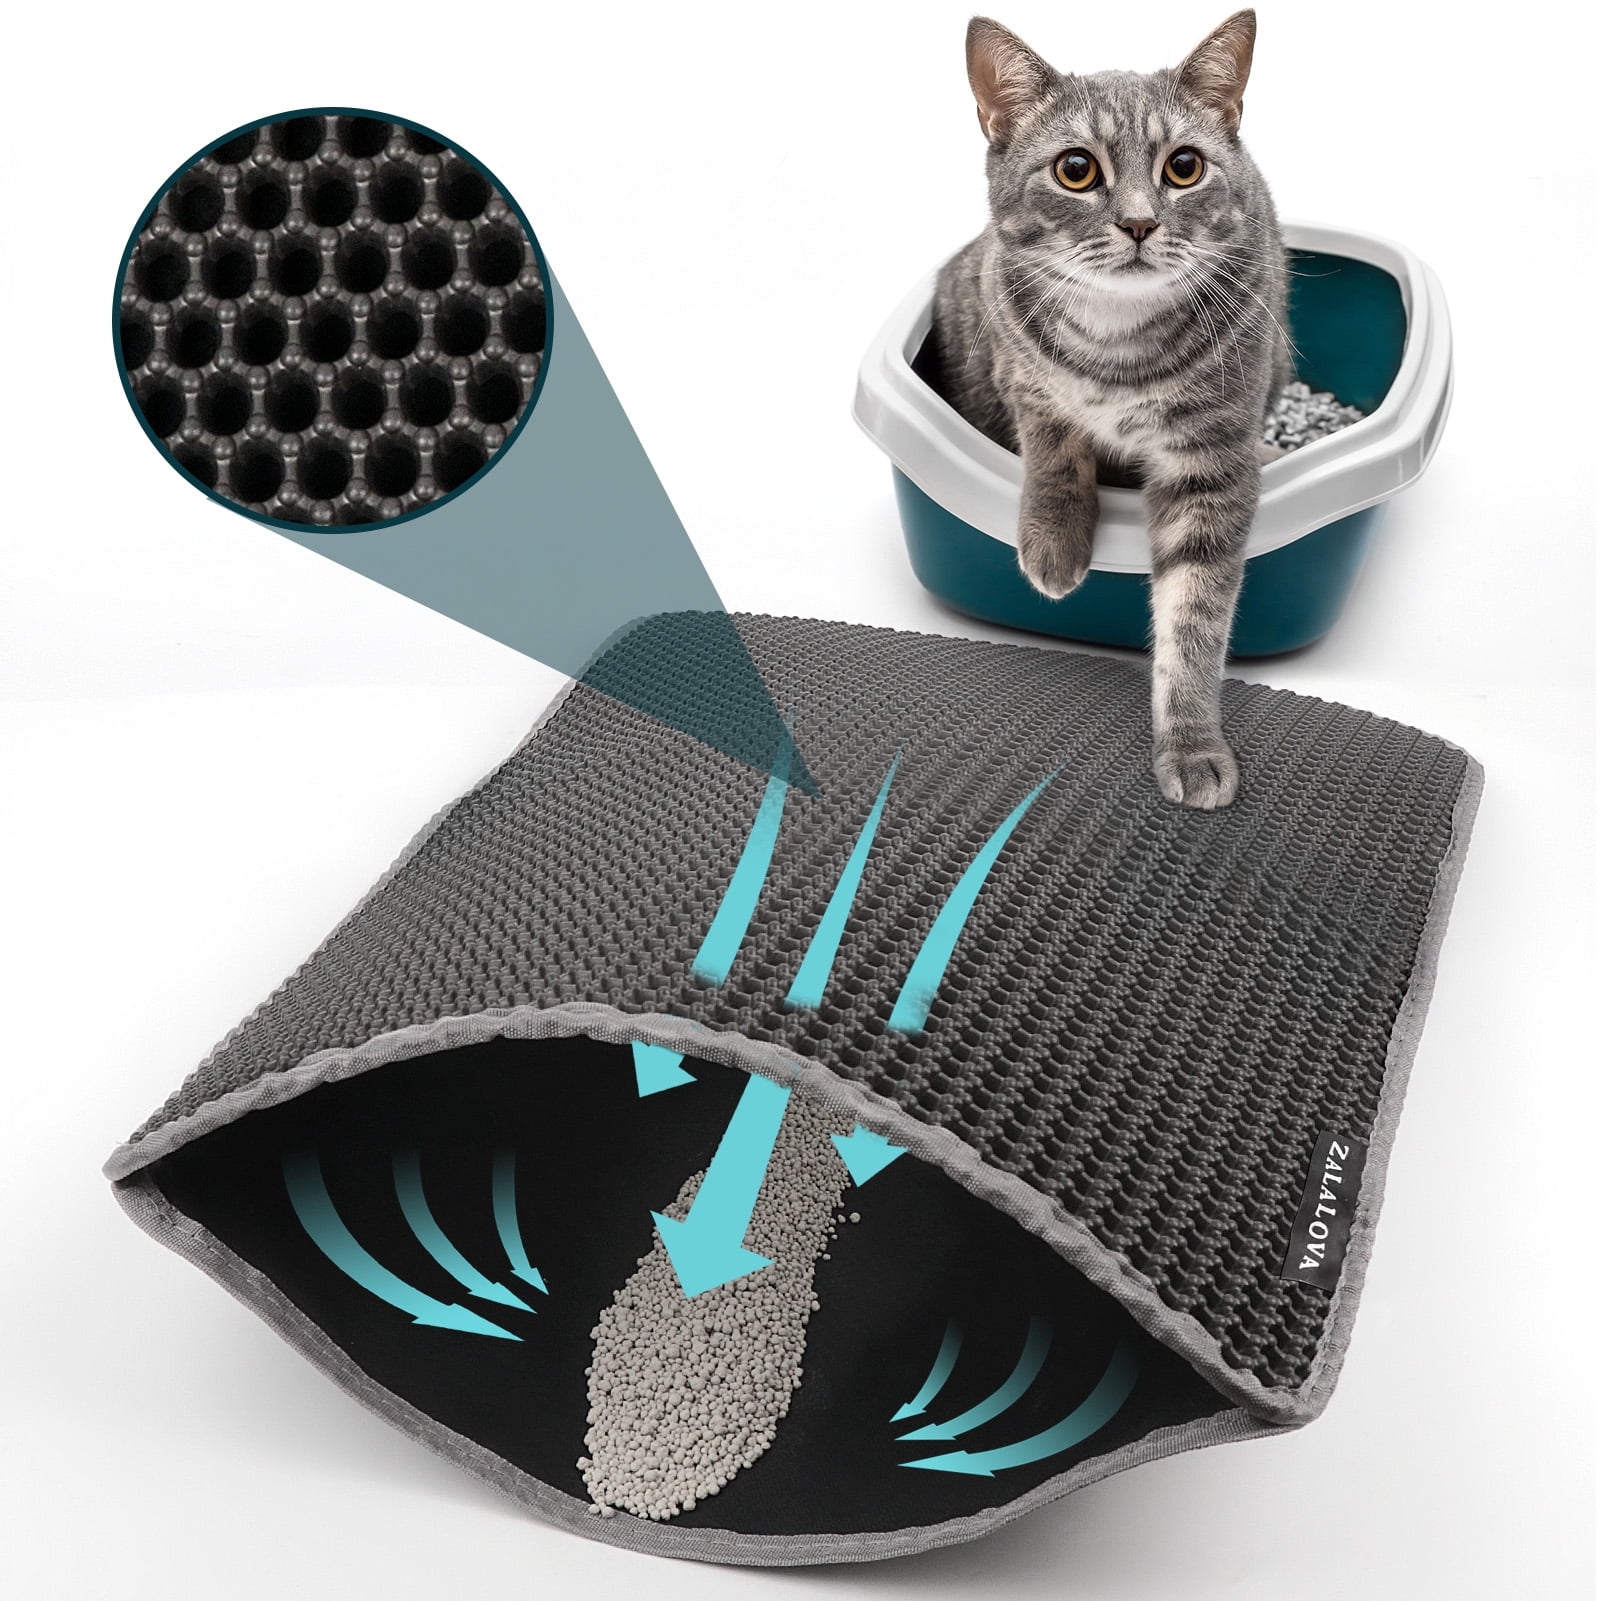 Drymate Original Cat Litter Mat, Contains Mess from Box for Cleaner Floors,  Urine-Proof, Soft on Kitty Paws -Absorbent/Waterproof- Machine Washable